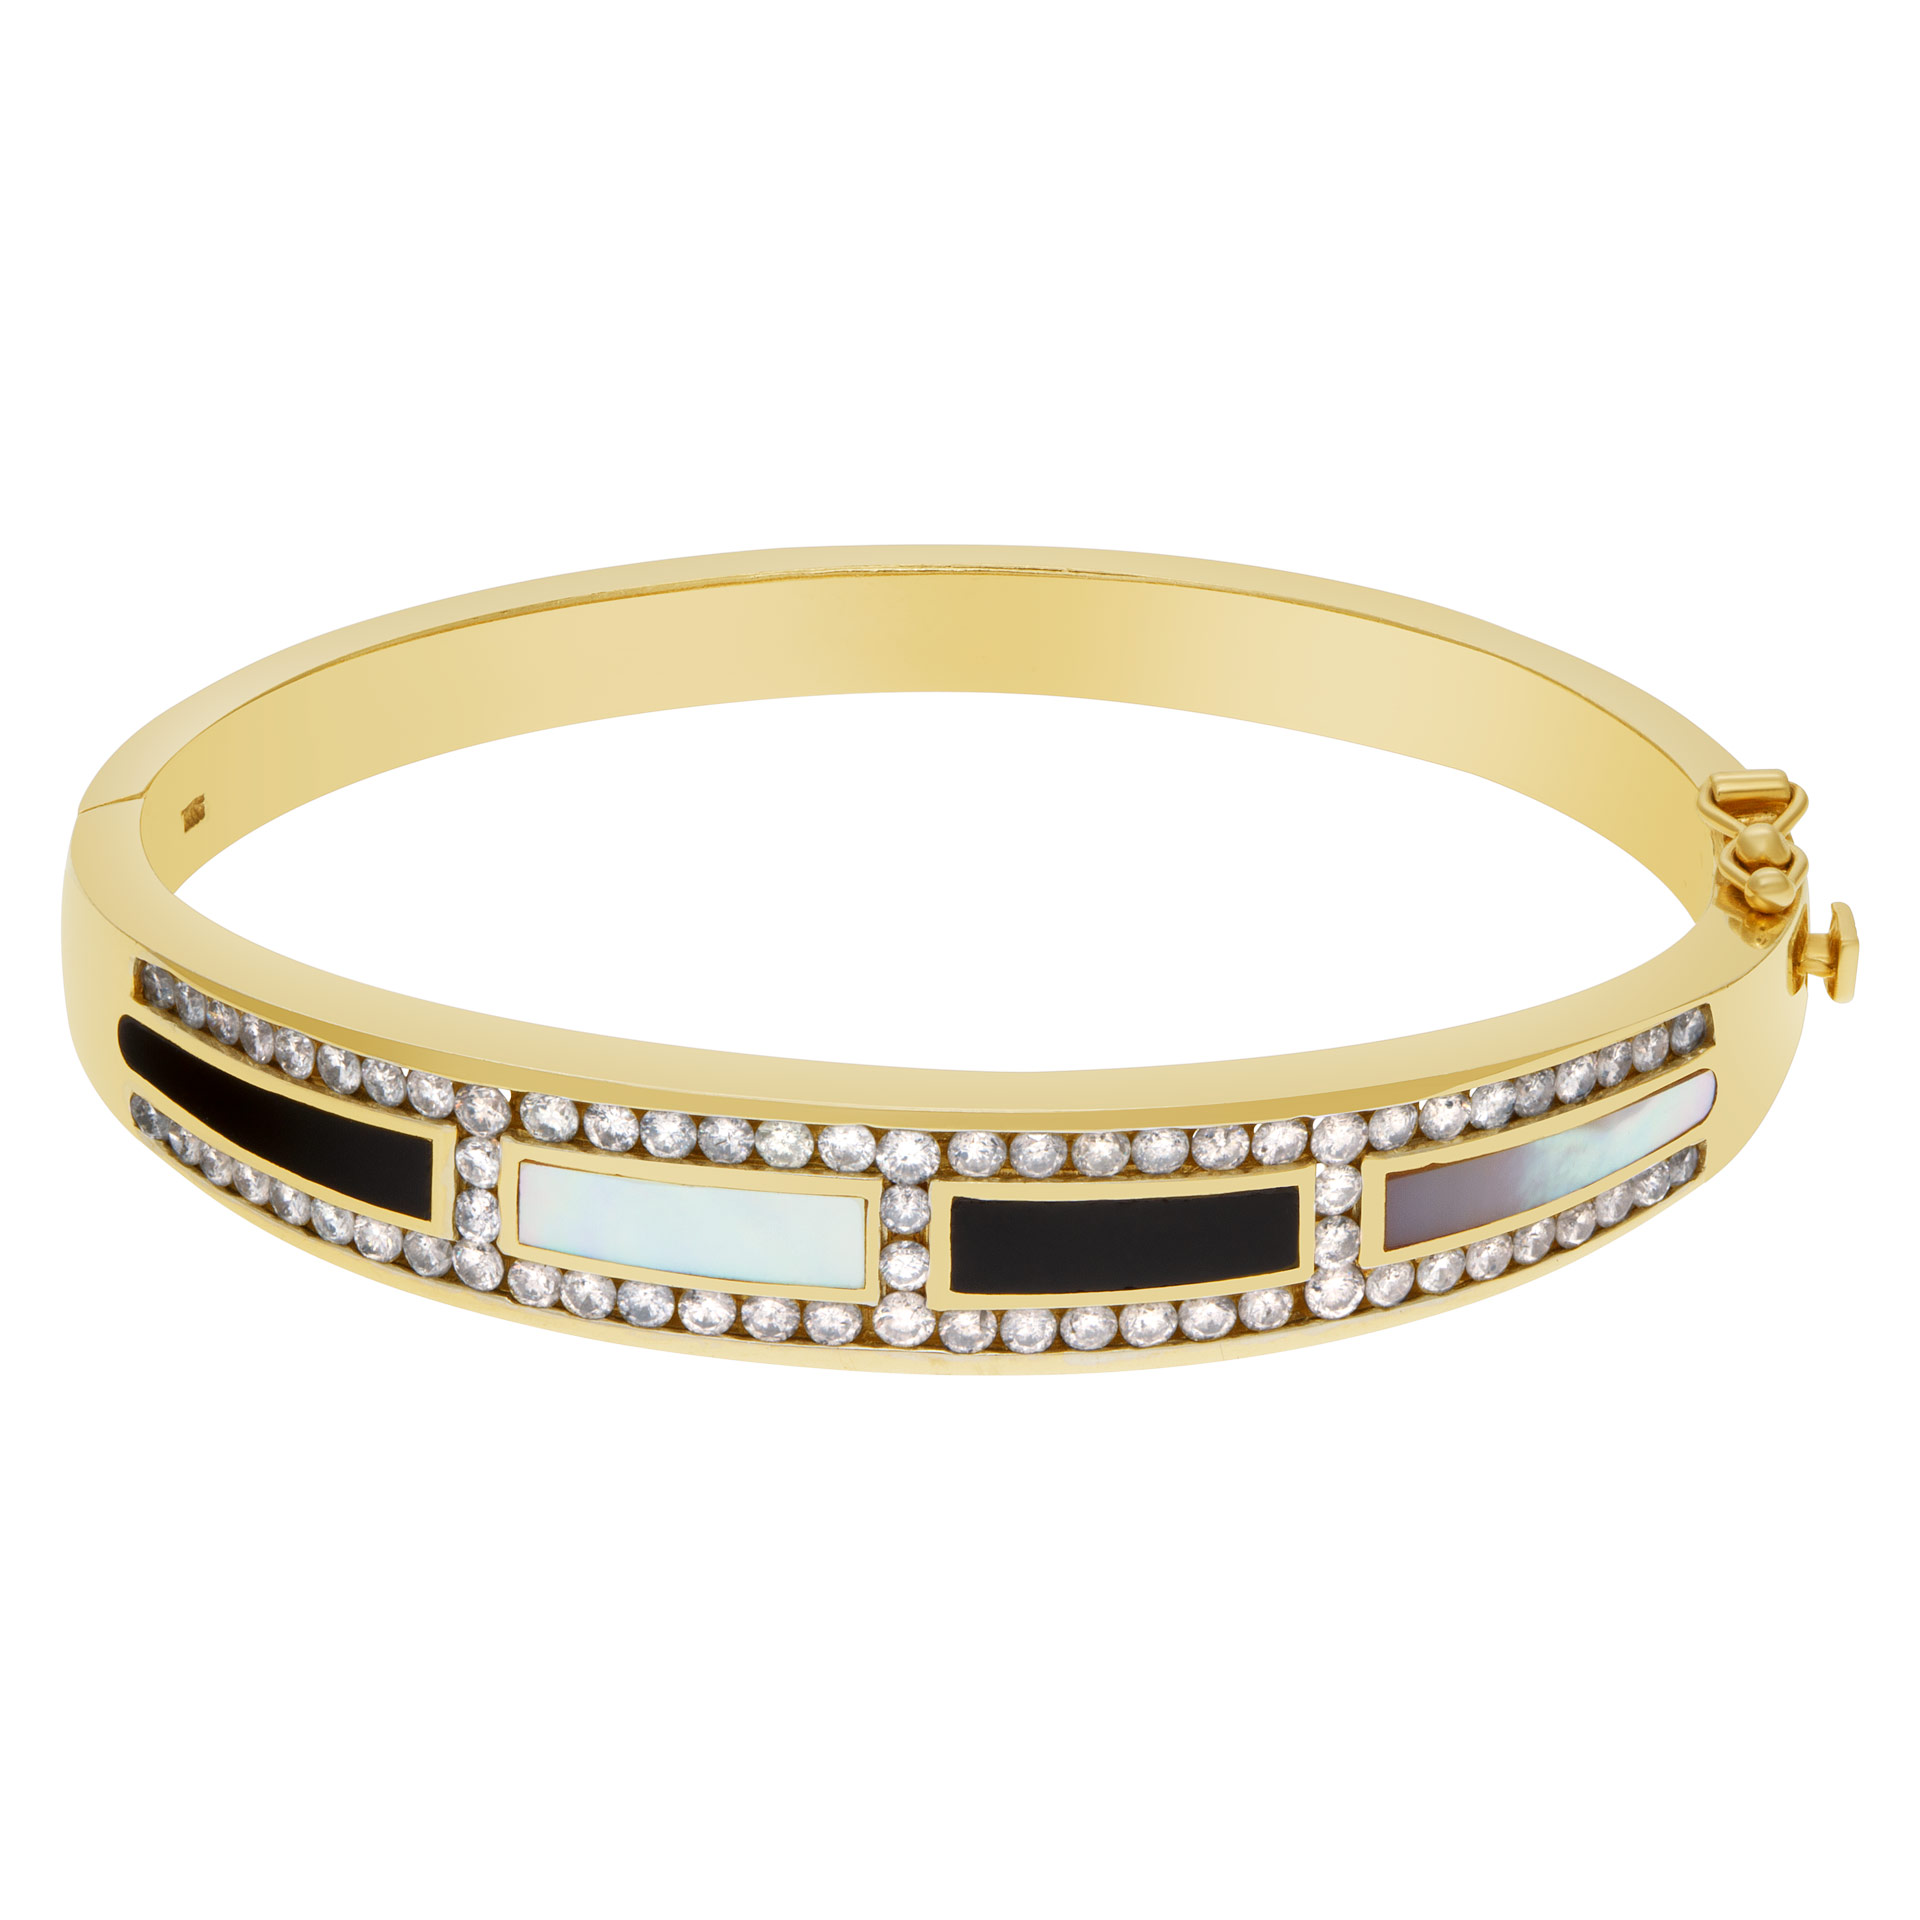 Regal diamond bangle in 14k with mother of pearl, black onyx inlay and diamonds image 1